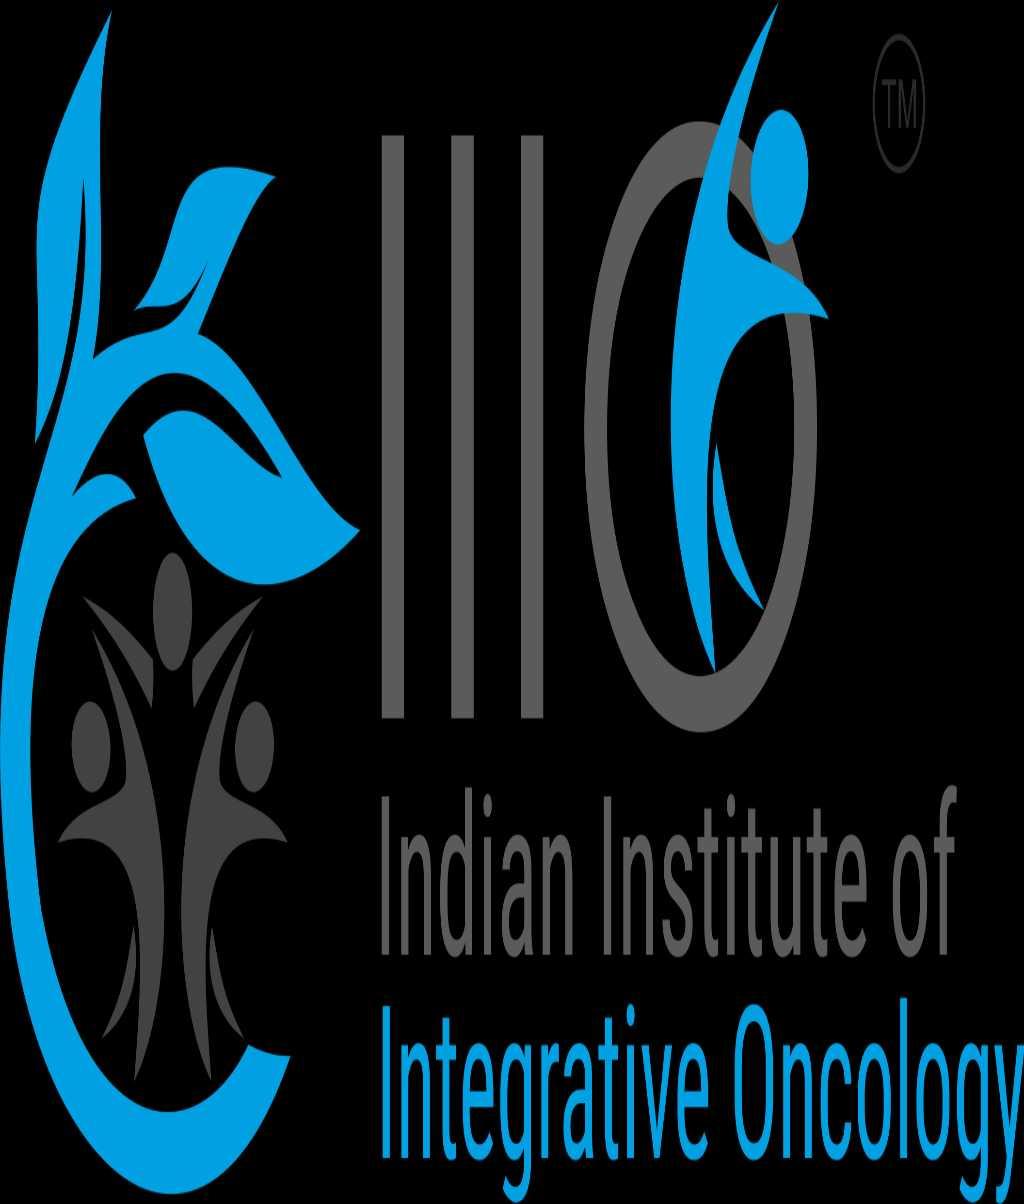 Indian institute of Integrative Oncology